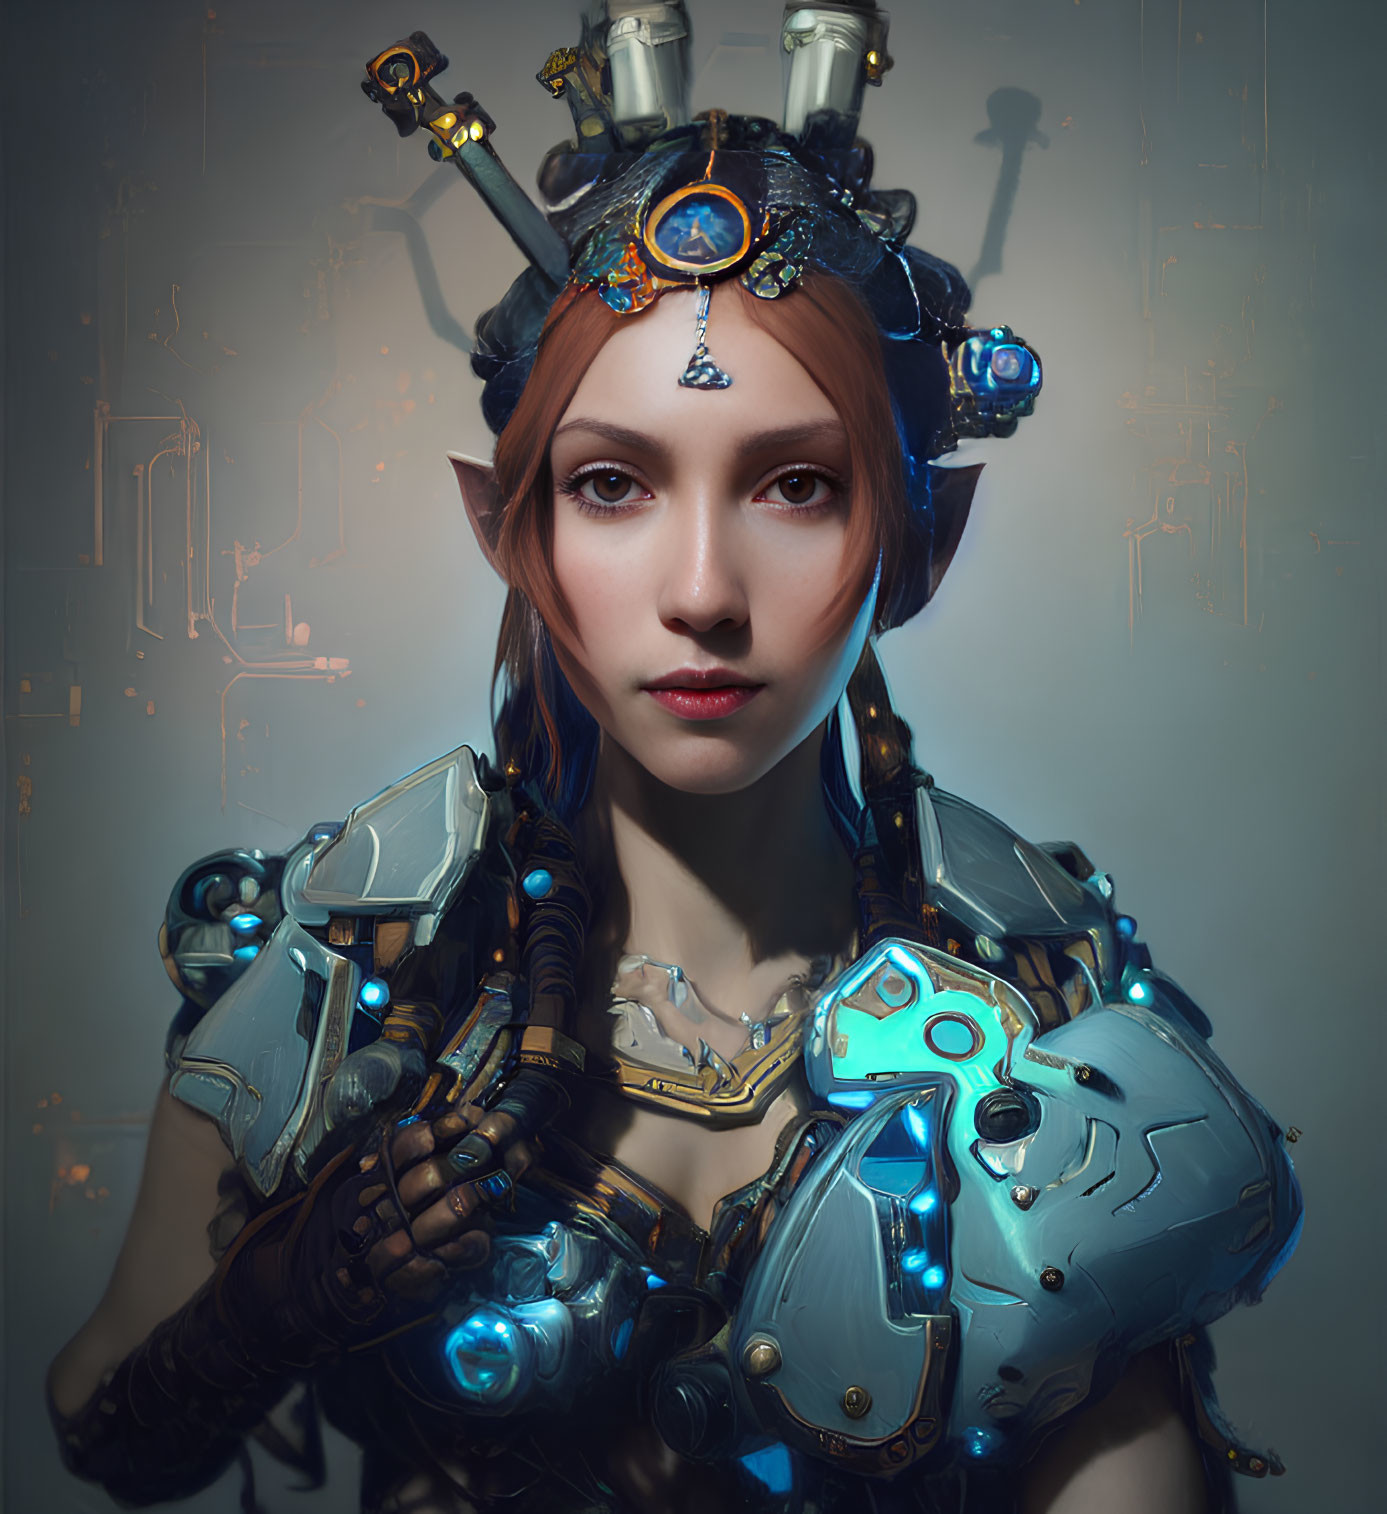 Futuristic cybernetic armor woman with glowing blue accents and orange hair